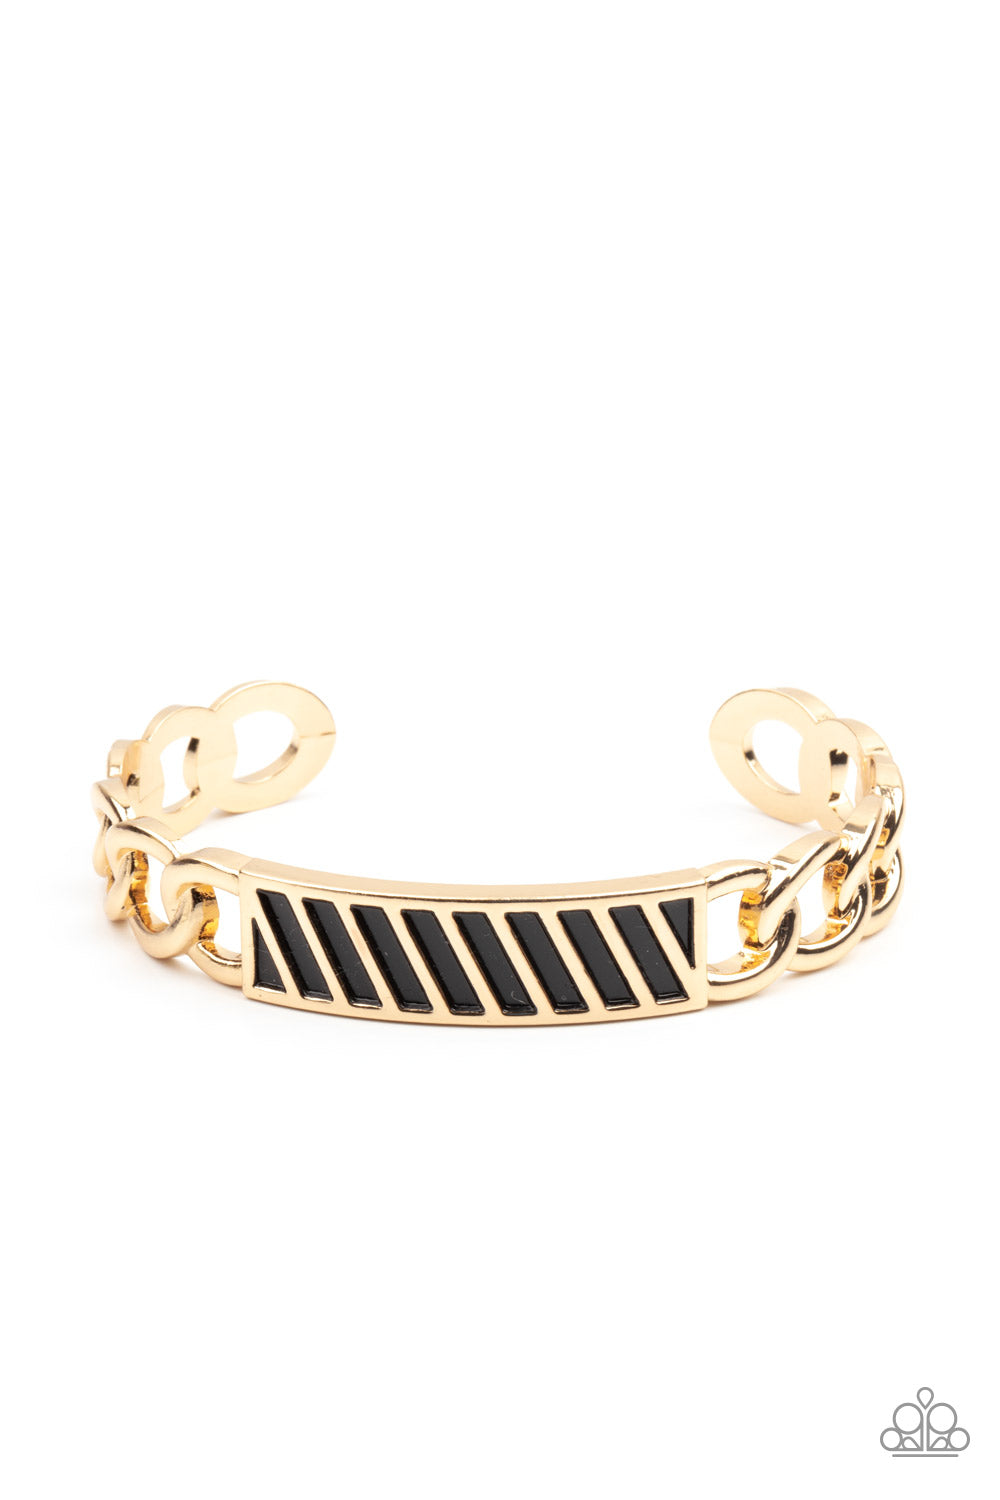 Keep Your Guard Up - Gold cuff bracelet 620